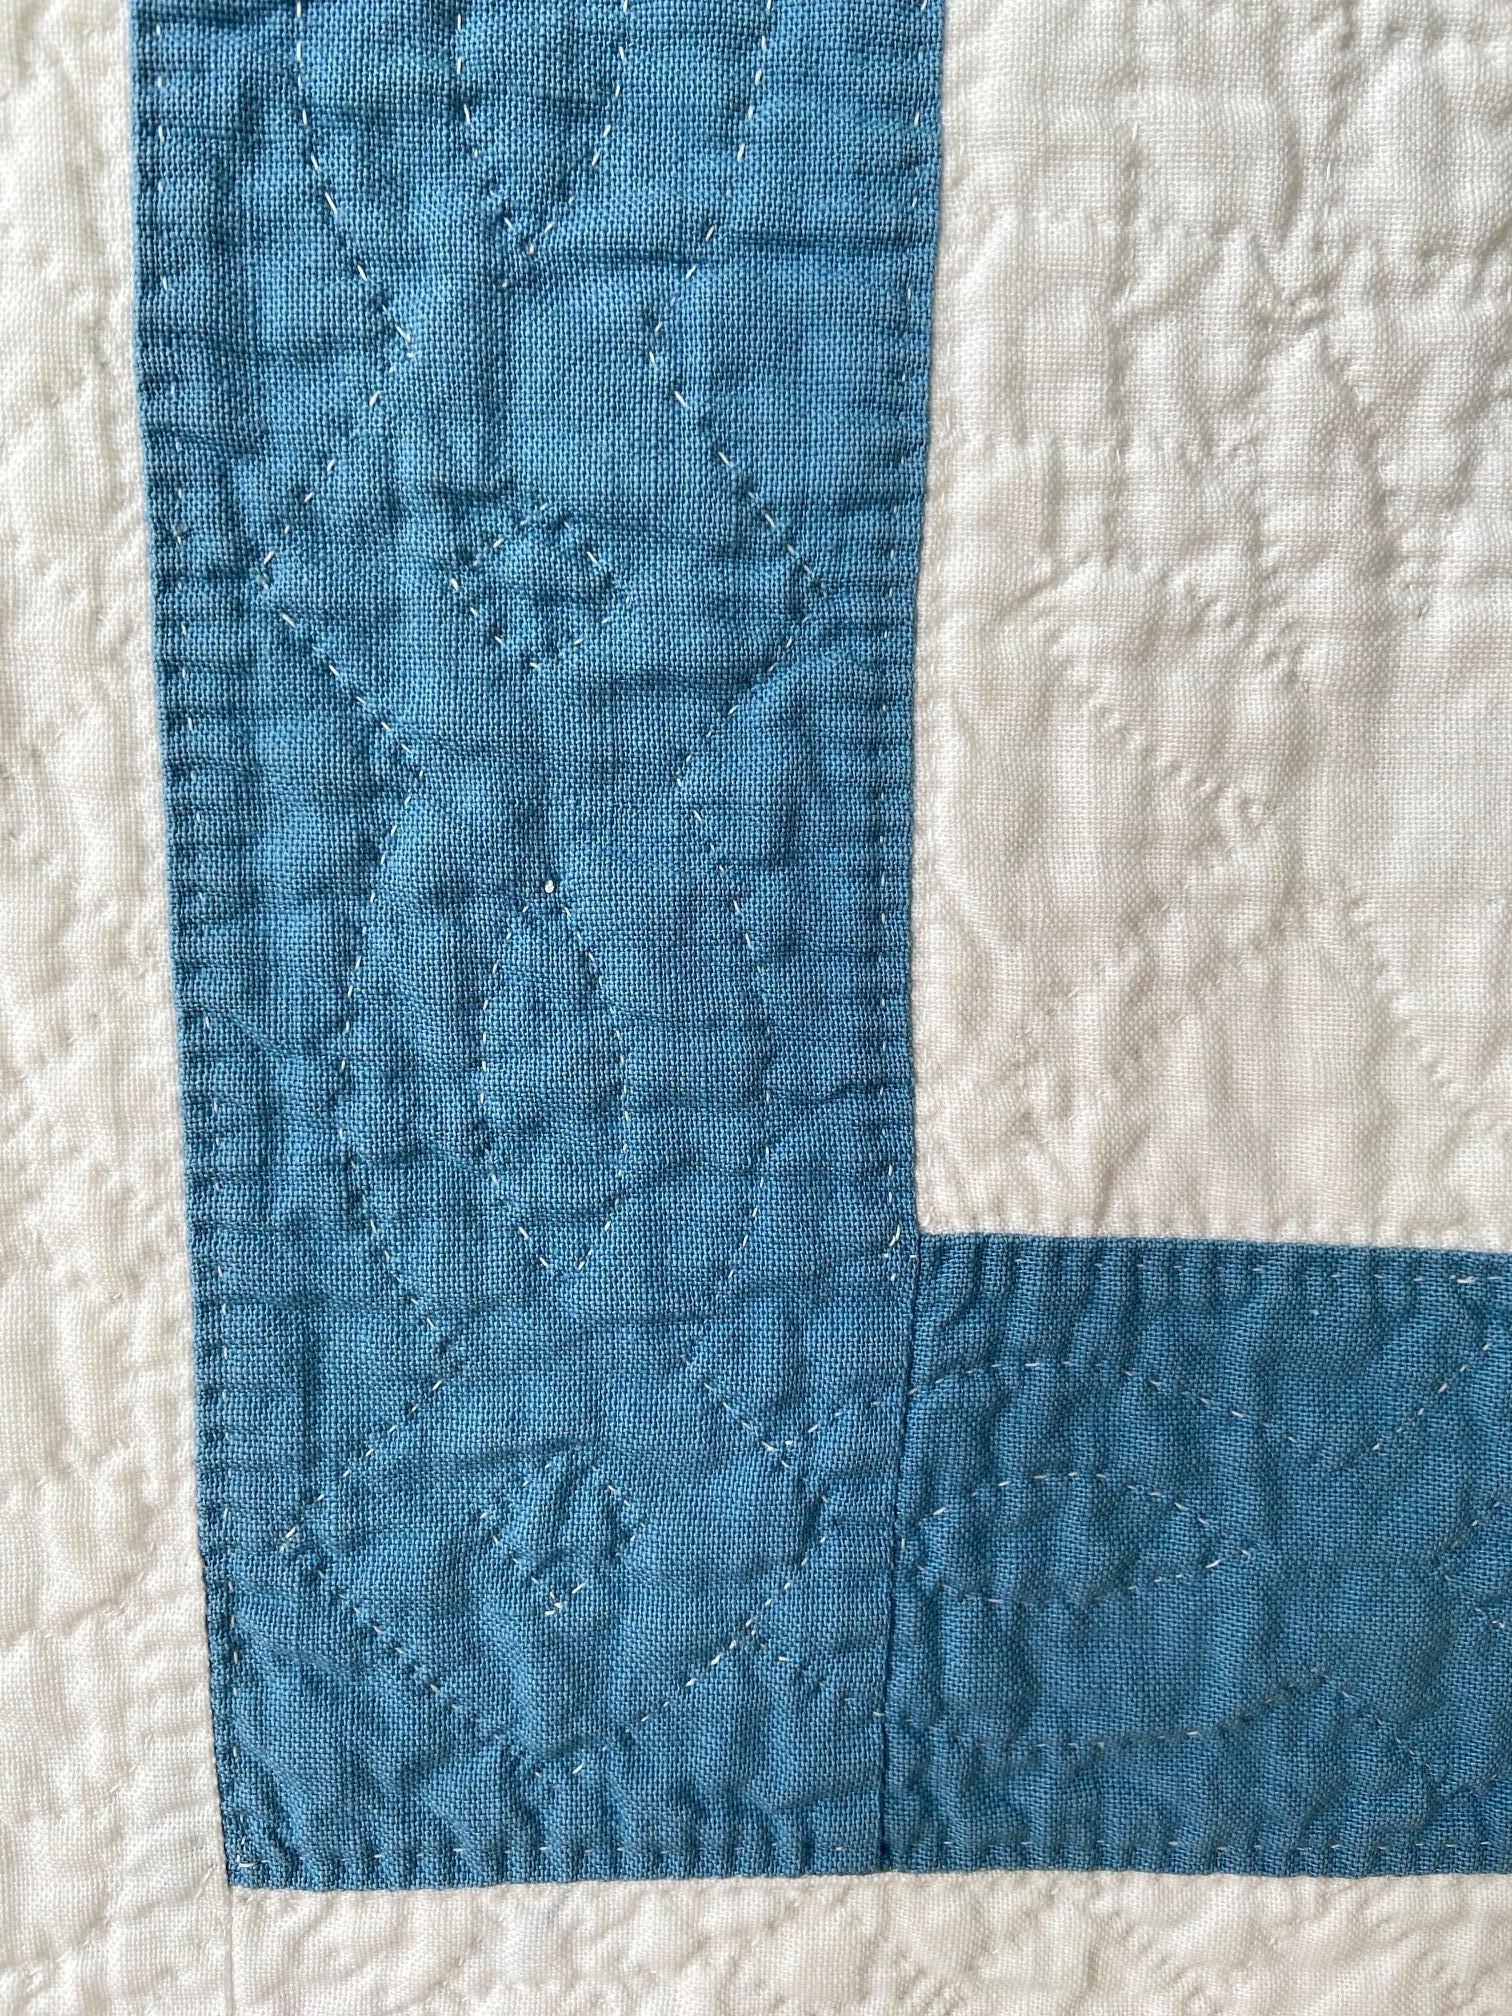 white quilt with blue stitching